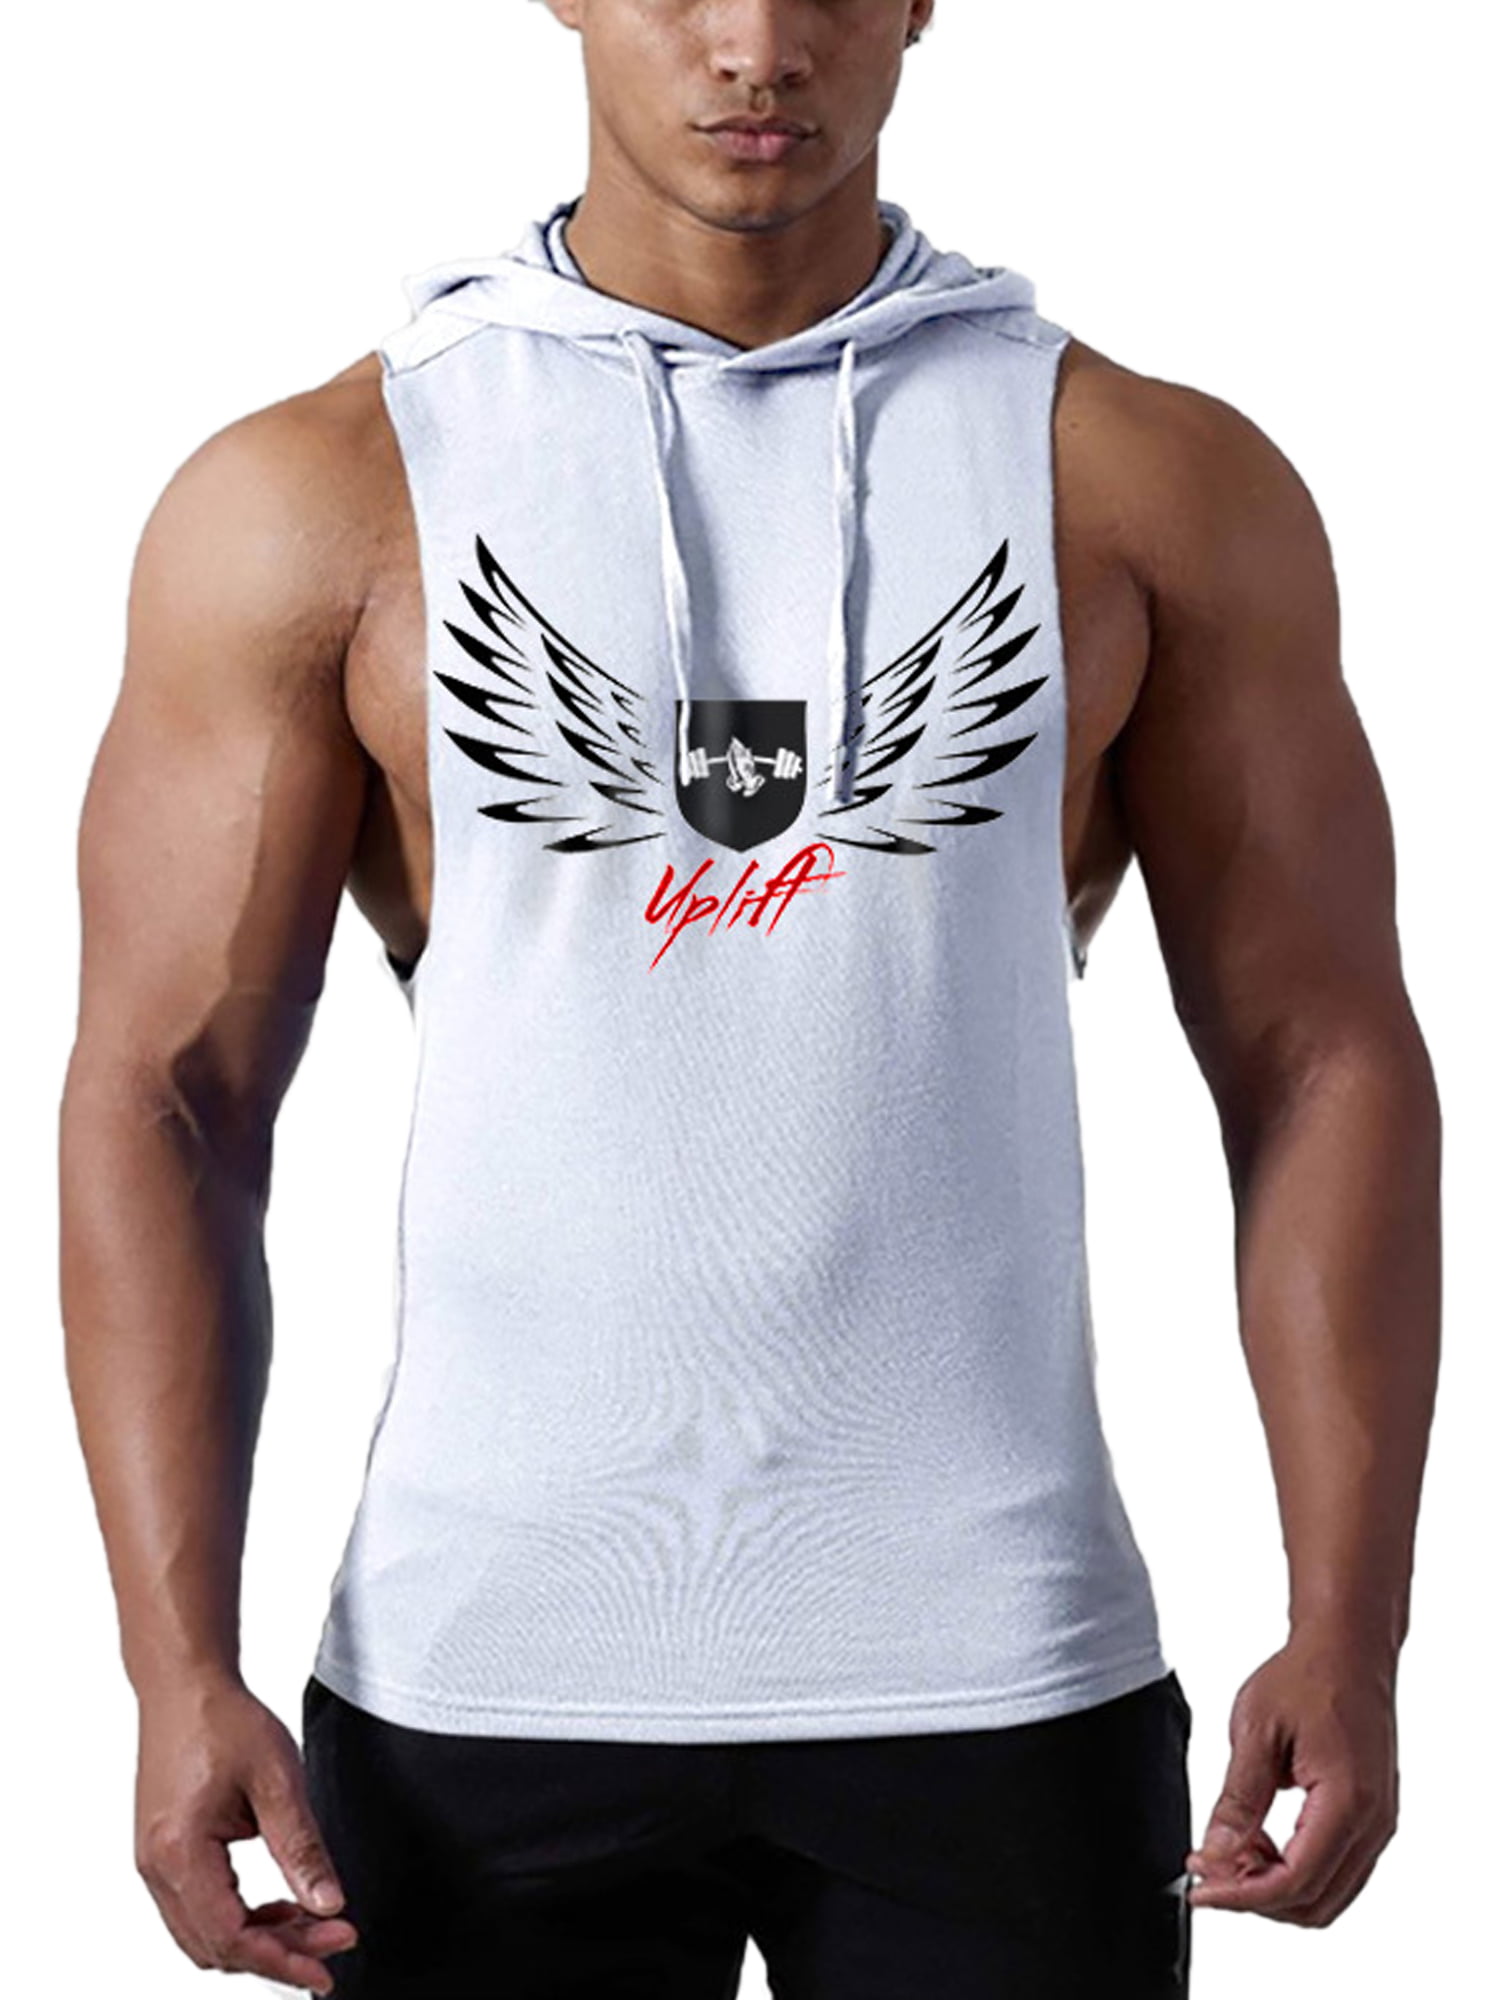 BALEAF Mens Workout Hooded Tank Tops Lightweight Athletic Sleeveless Shirts Running Gym Training Quick Dry